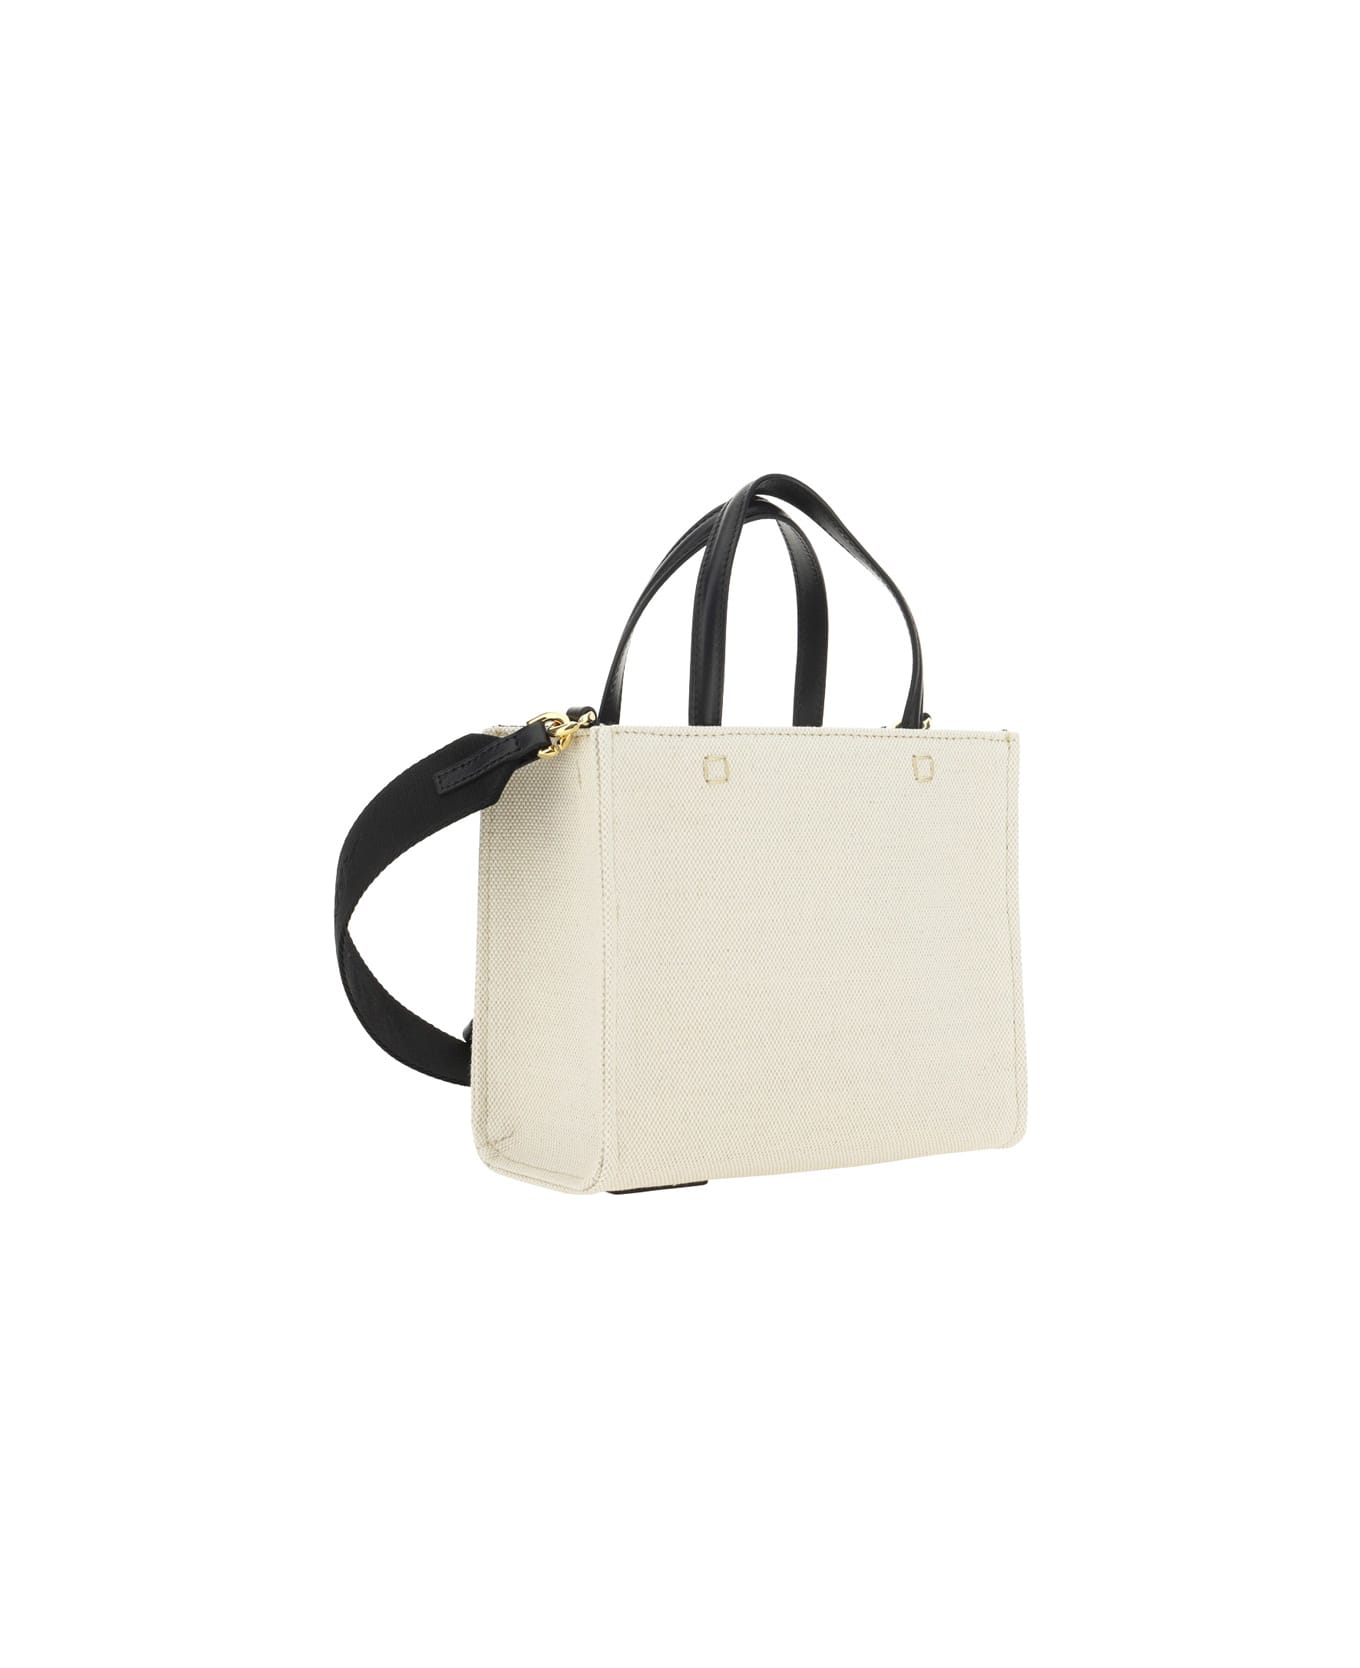 Givenchy G-tote Mini Tote - Beige/black トートバッグ